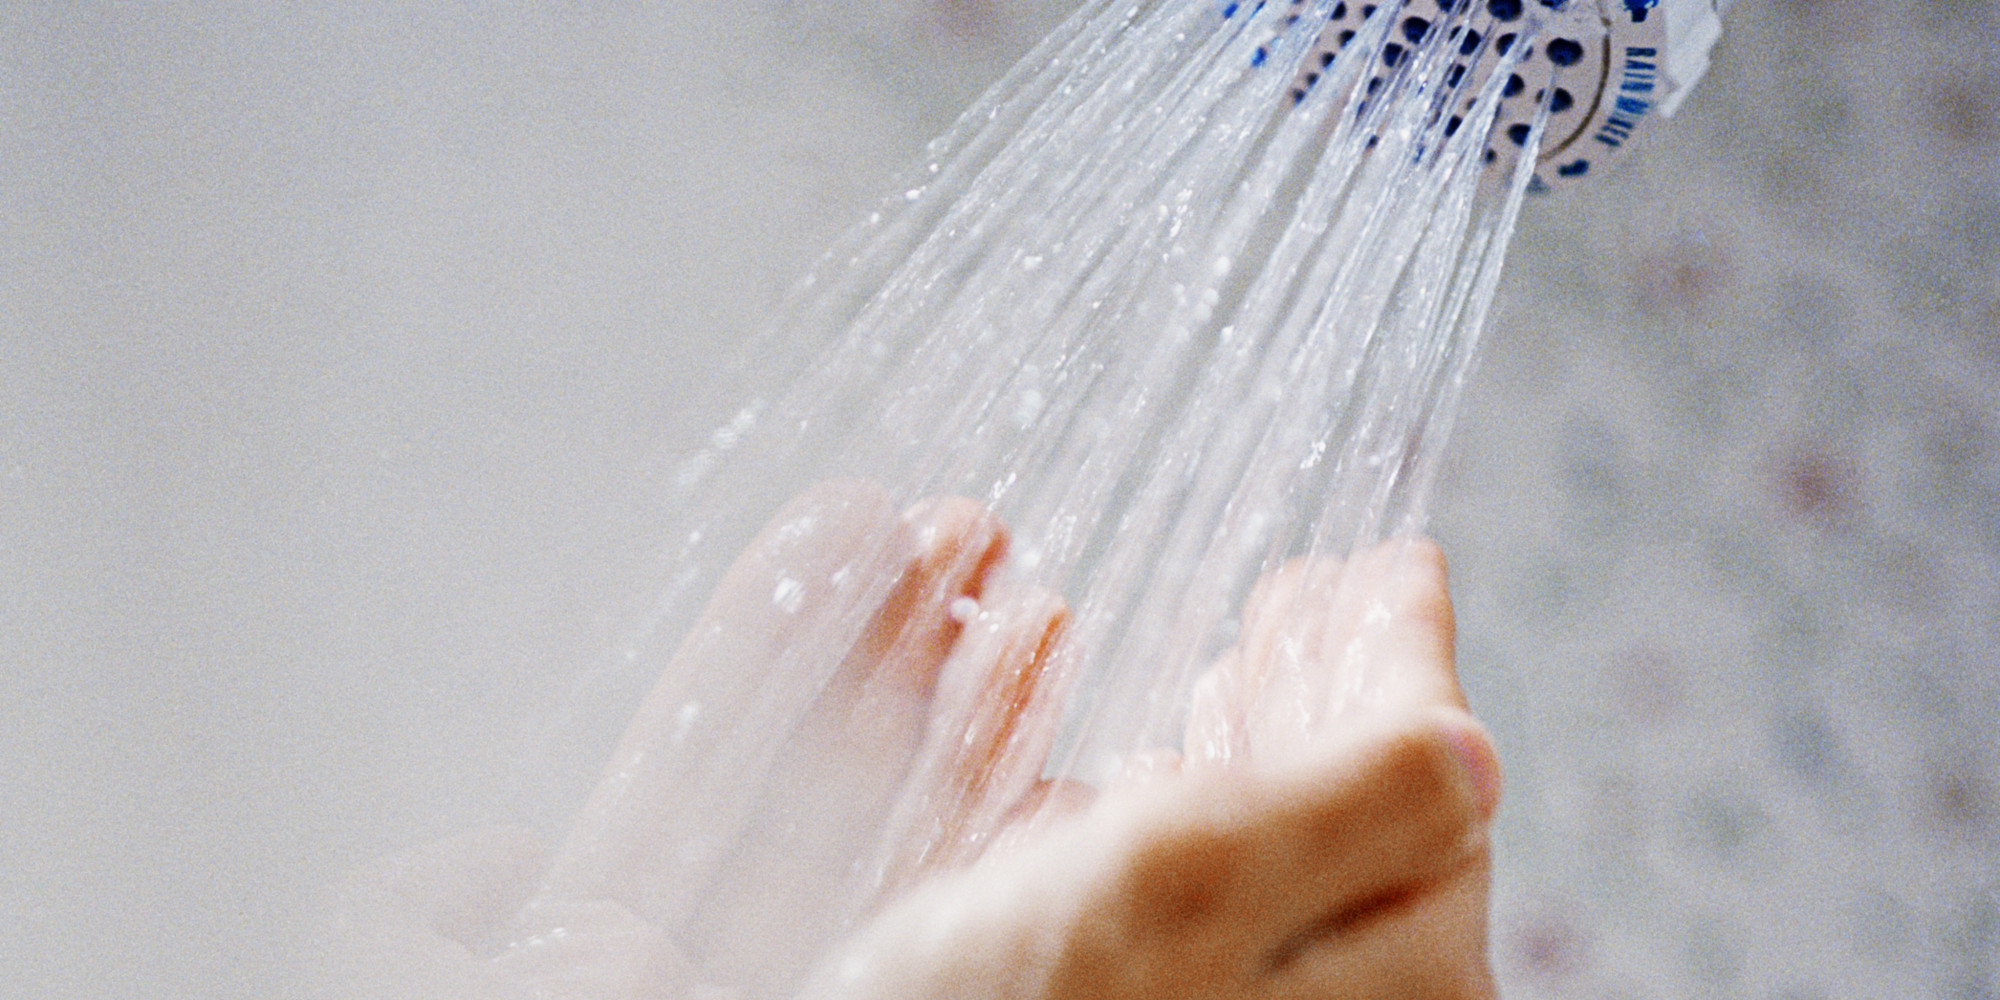 Cupped Hands Under Shower